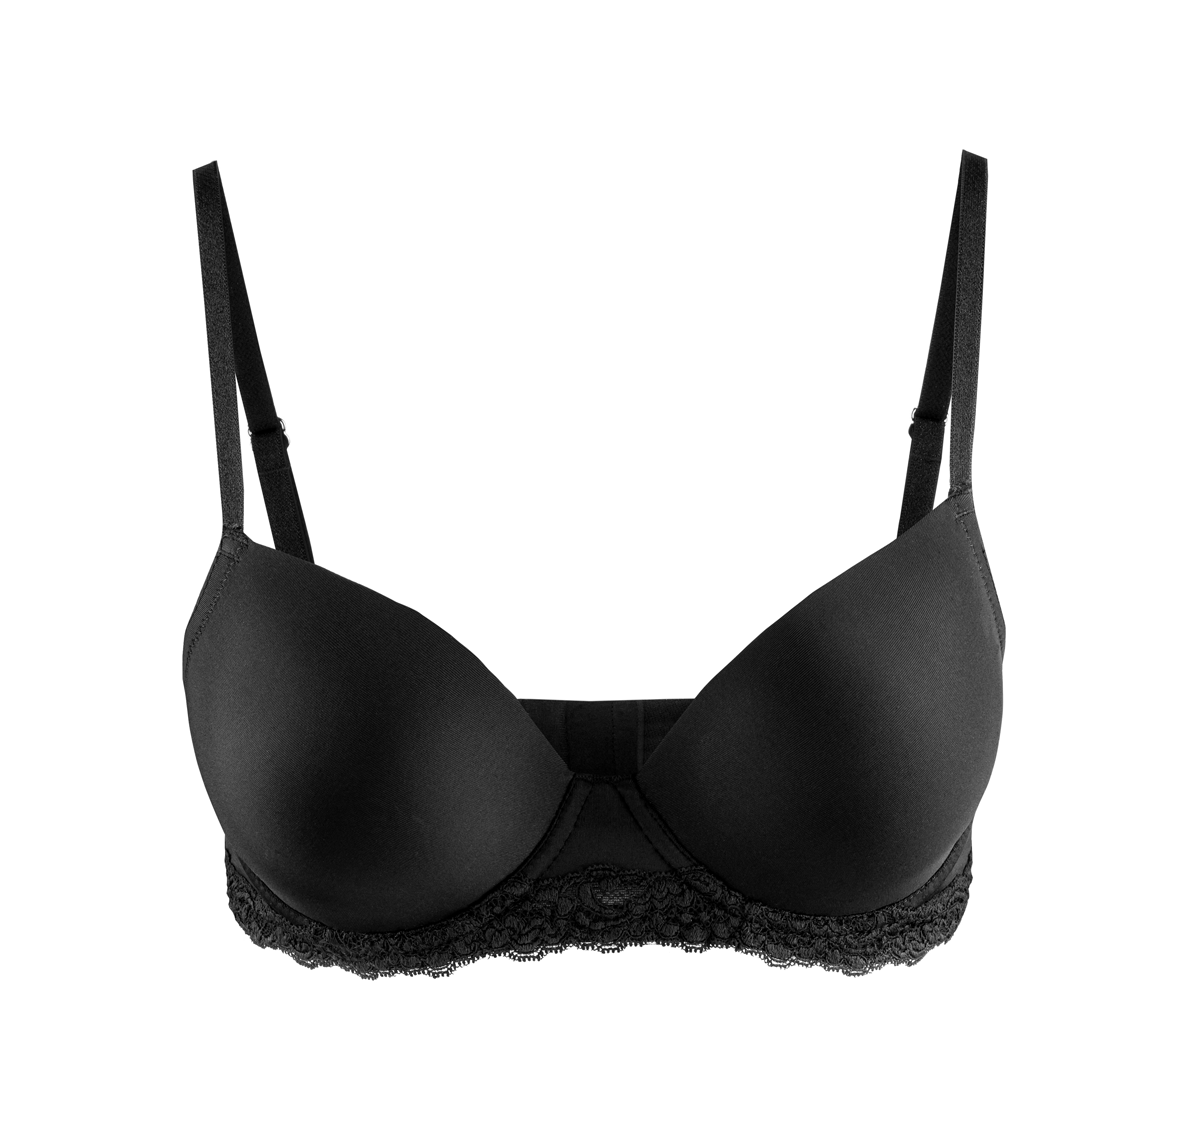 We Are Bra Fitting, Bra Design and Bra Production Experts in